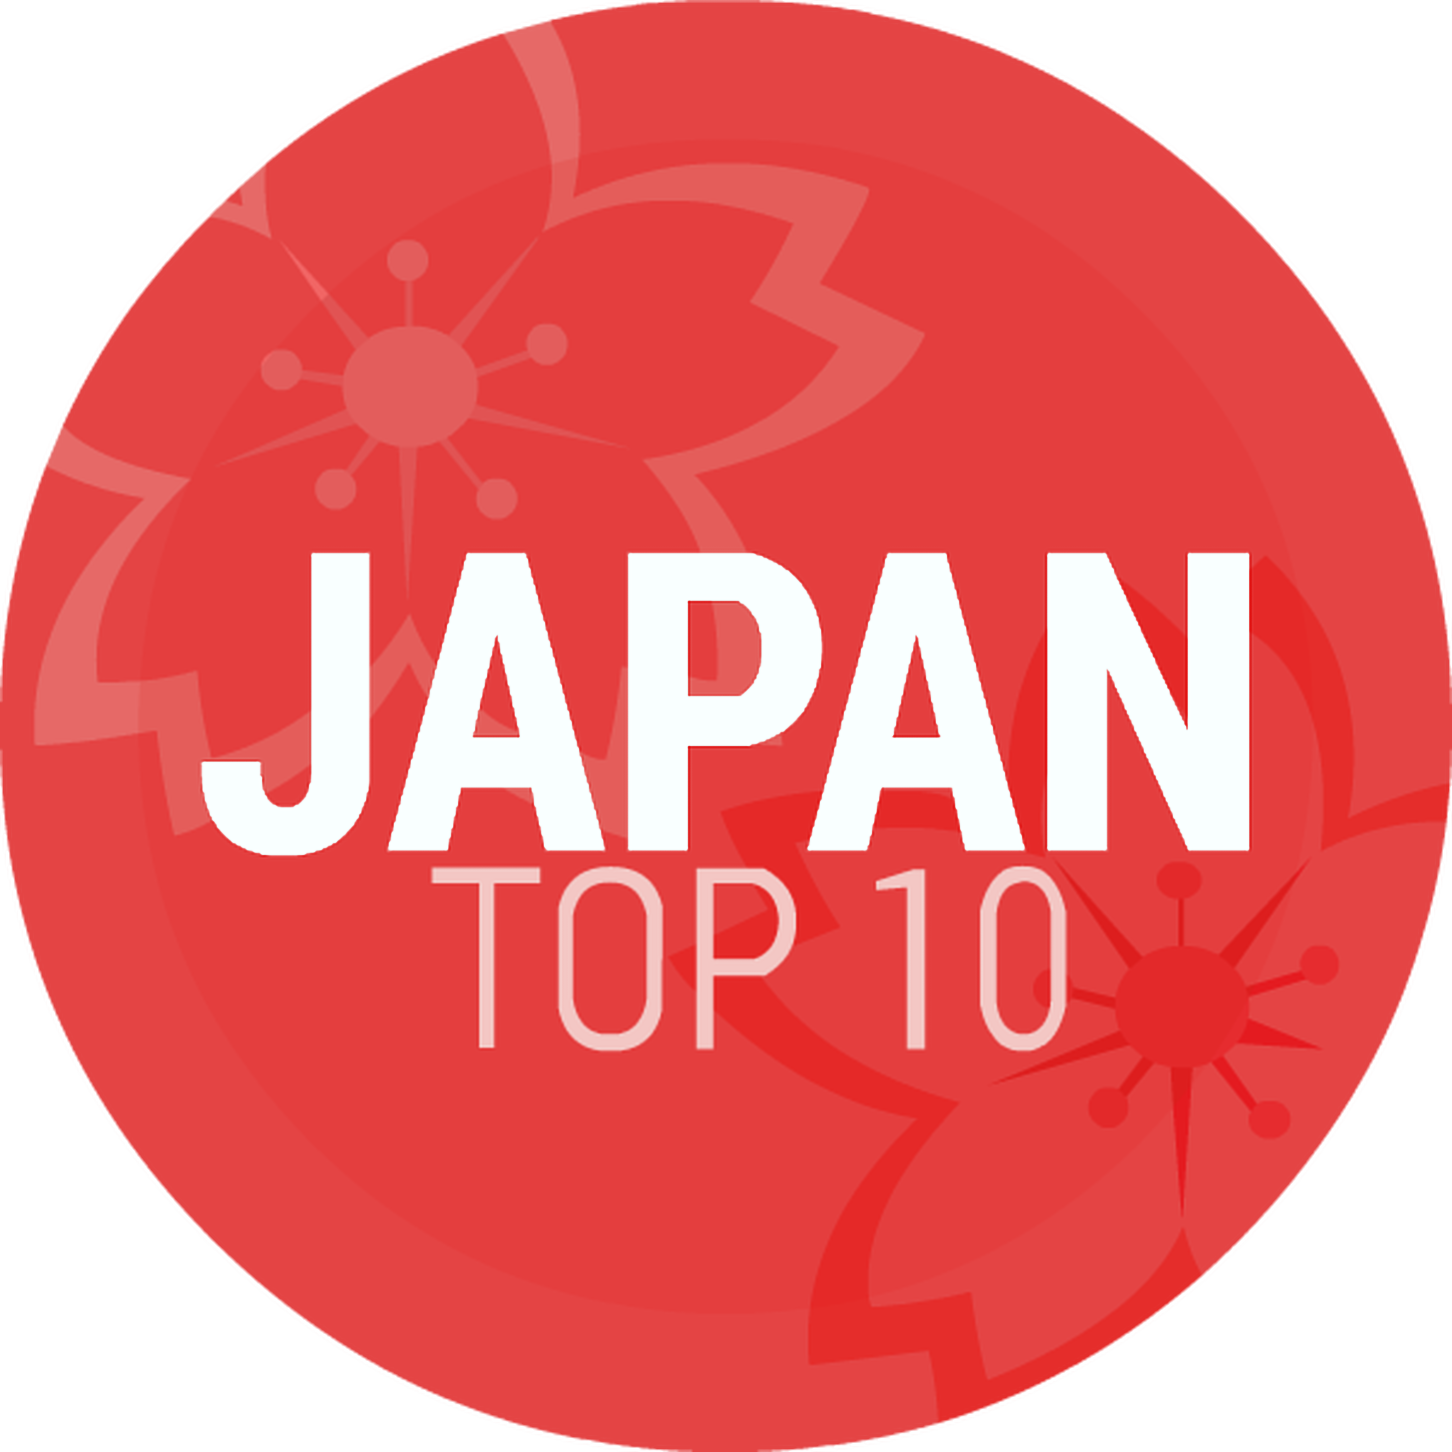 Episode 224: Japan Top 10 March 2018 Artist of the Month: The Pillows